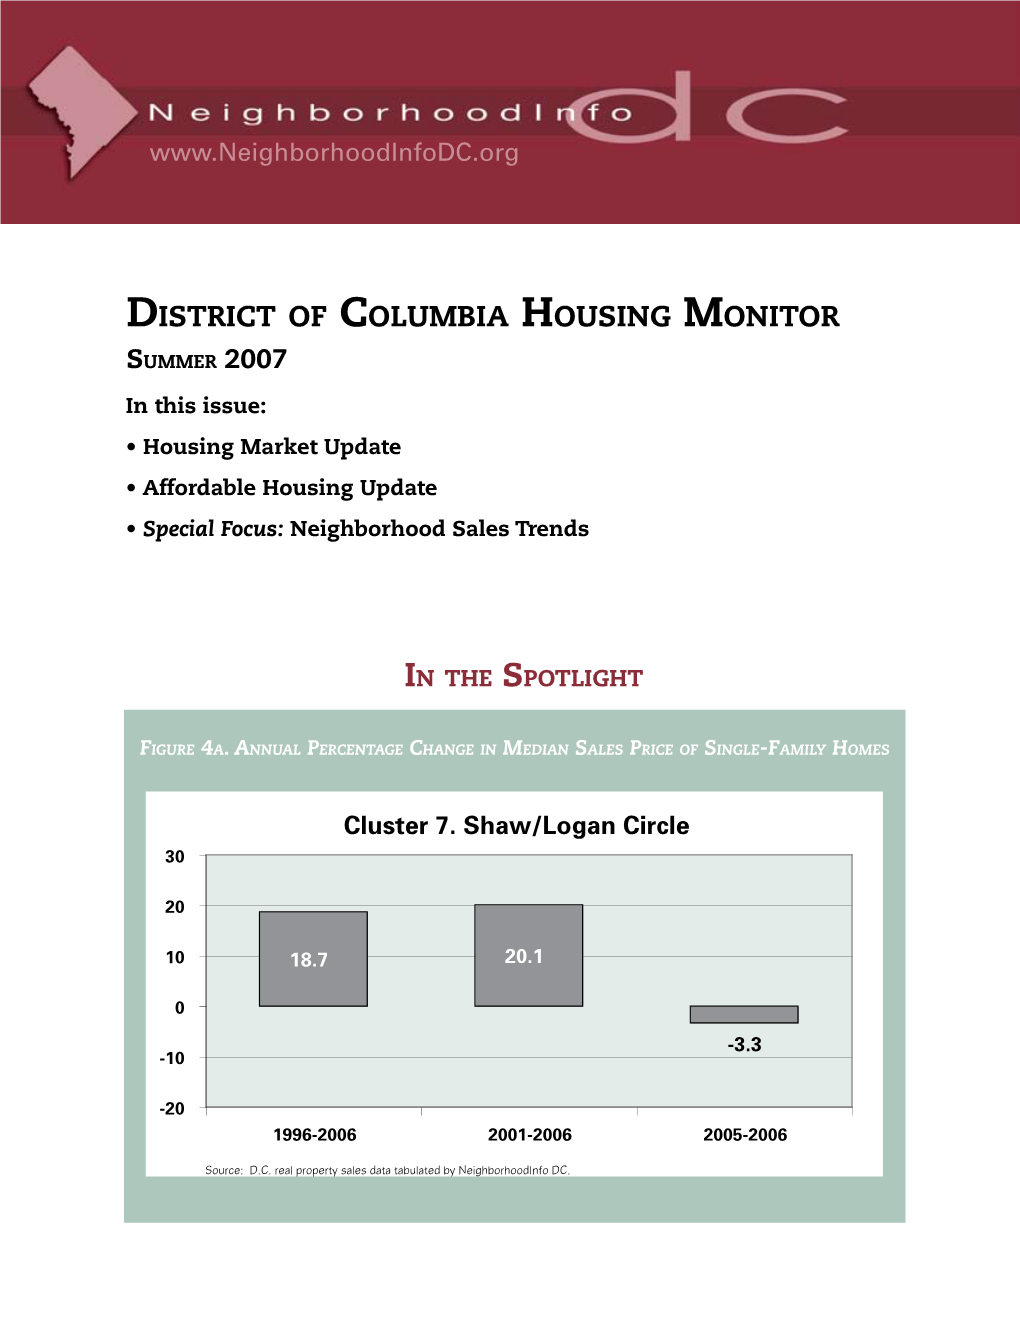 District of Columbia Housing Monitor Summer 2007